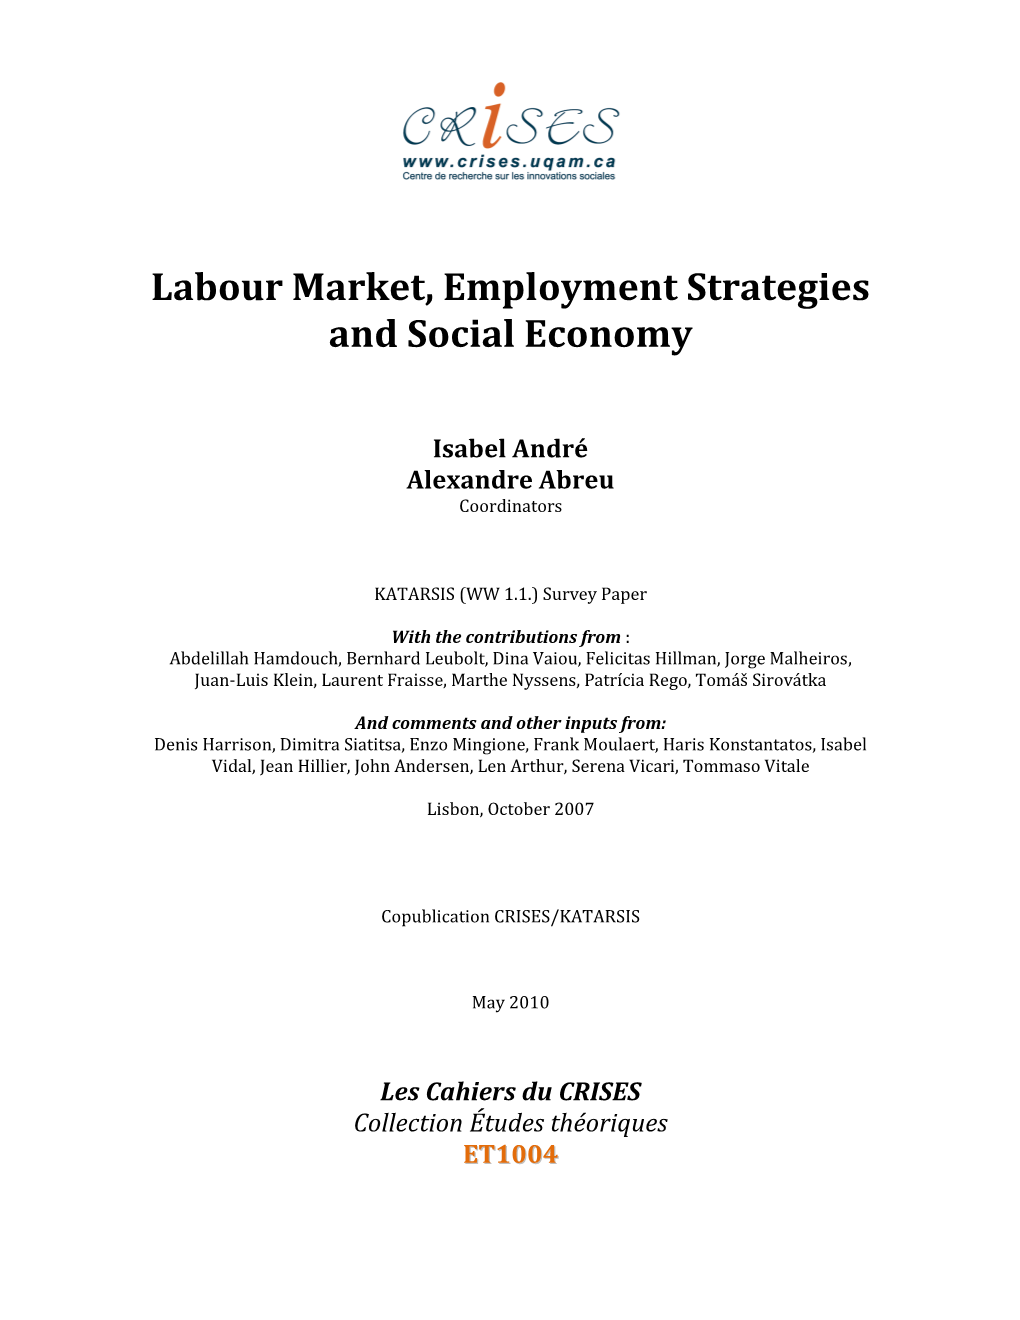 Labour Market, Employment Strategies and Social Economy